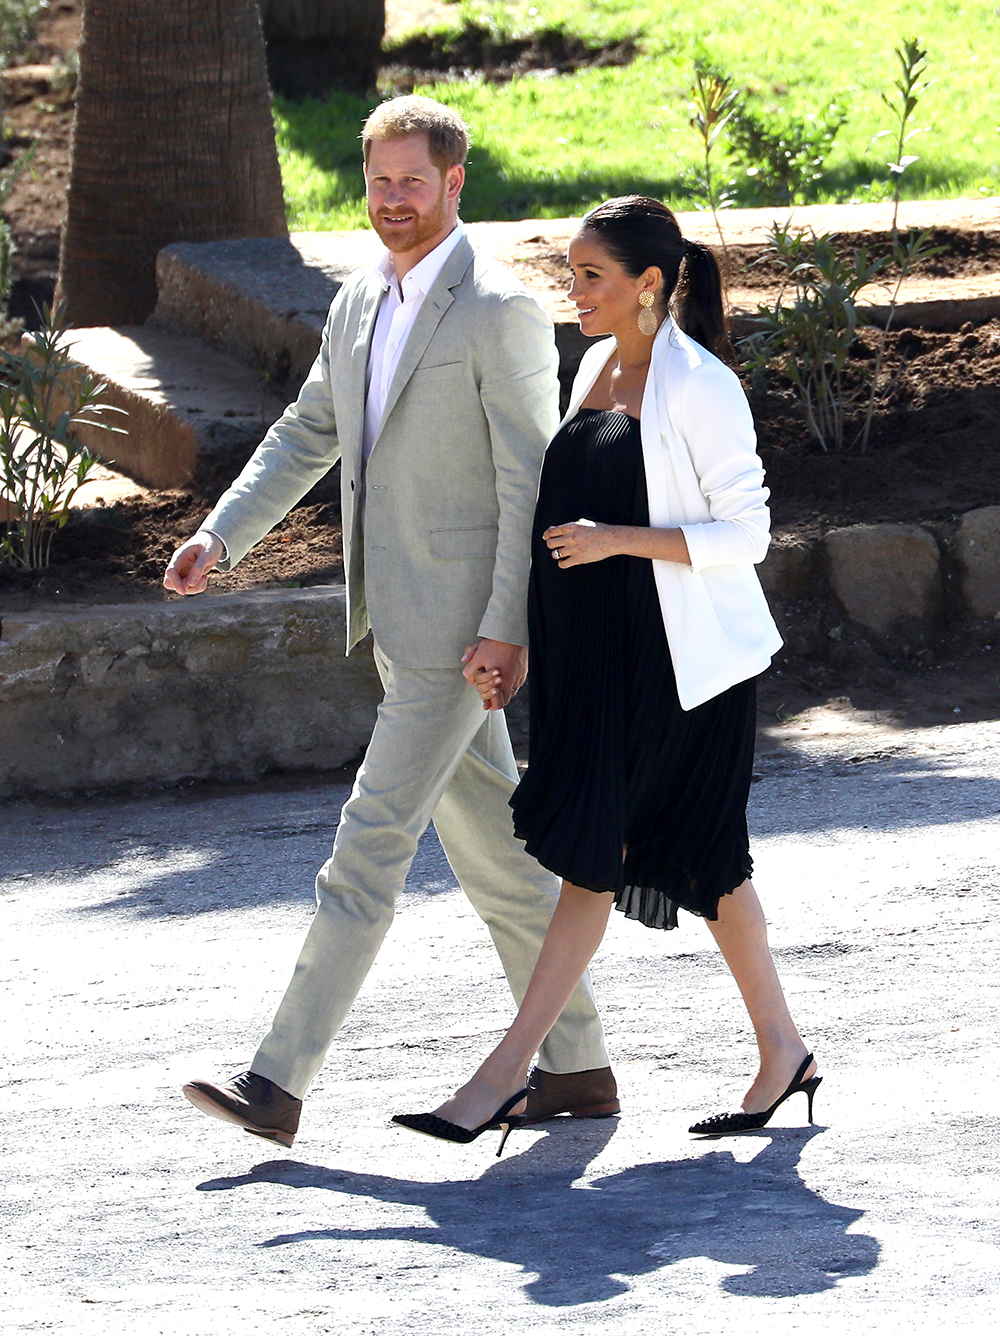 RABAT, MOROCCO - FEBRUARY 25: Prince Harry, Duke of Sussex and Meghan, Duchess of Sussex walk through the walled public Andalusian Gardens which has exotic plants, flowers and fruit trees during a visit on February 25, 2019 in Rabat, Morocco. (Photo by Tim P. Whitby/Getty Images)